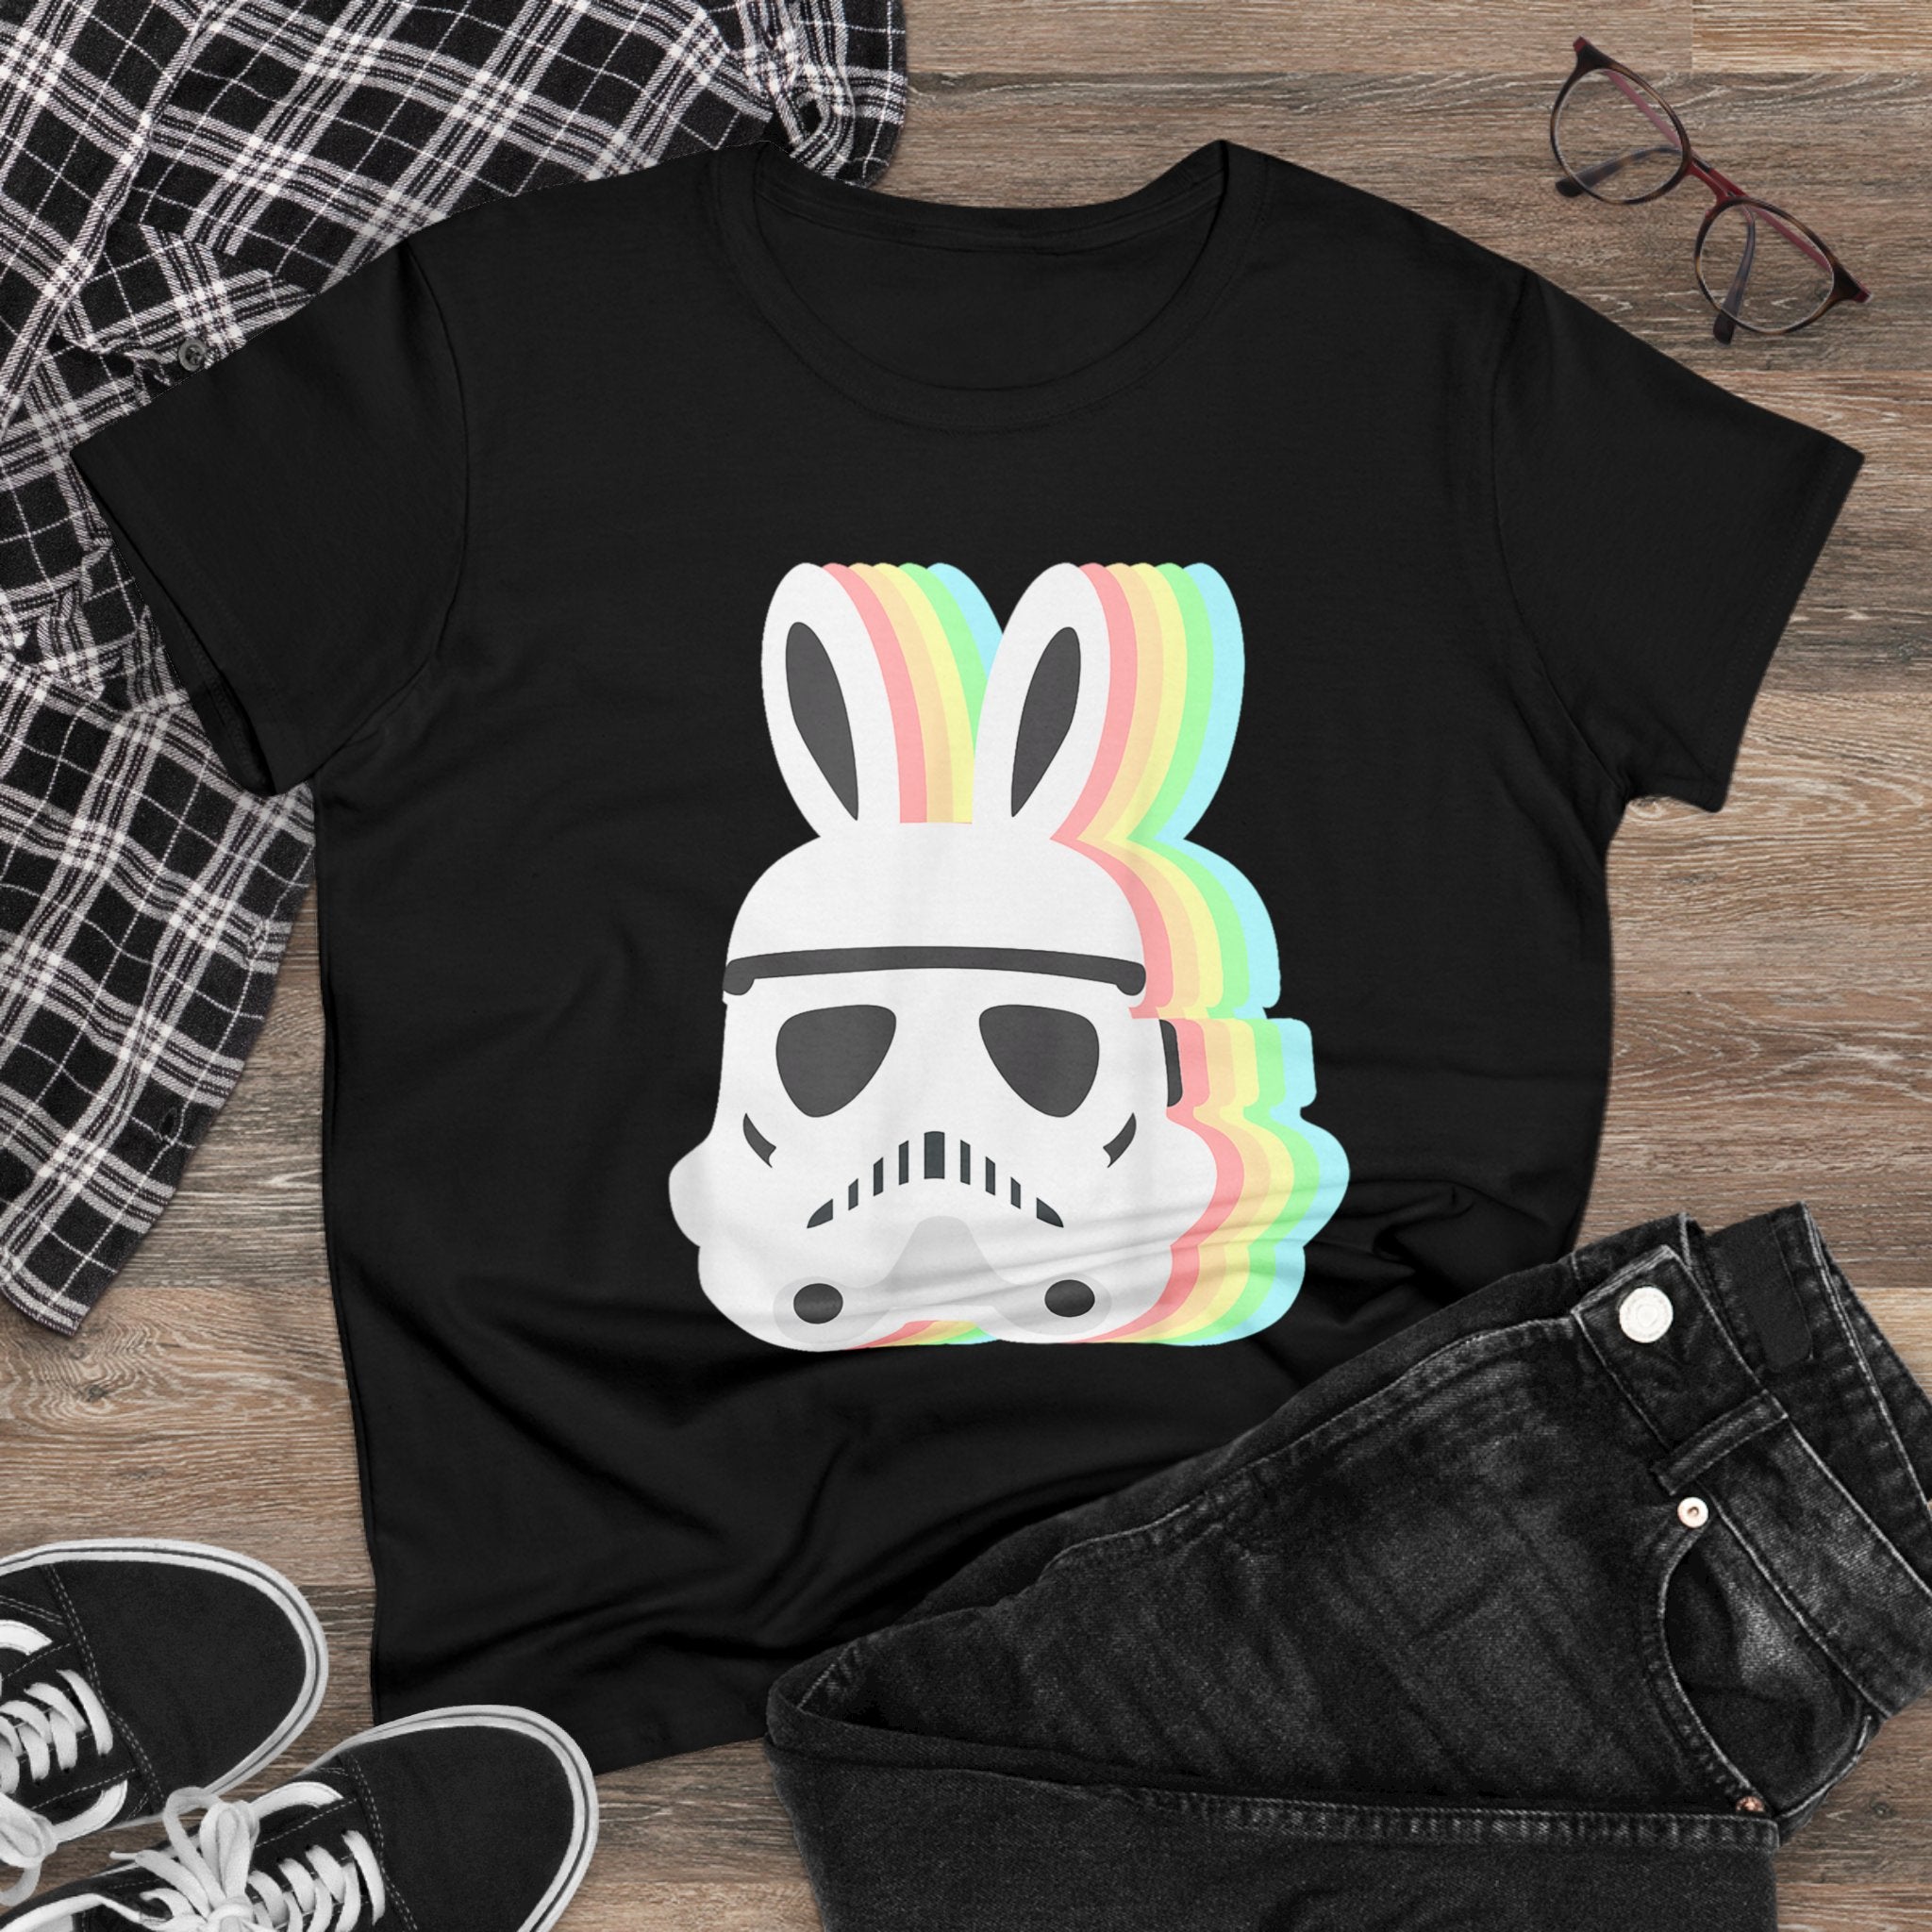 Black Star Wars Easter Stormtrooper - Women's Tee featuring a graphic of an Easter Stormtrooper helmet with bunny ears and rainbow layers. Shirt lies on a wooden floor, accompanied by plaid shirt, black jeans, sneakers, and eyeglasses.